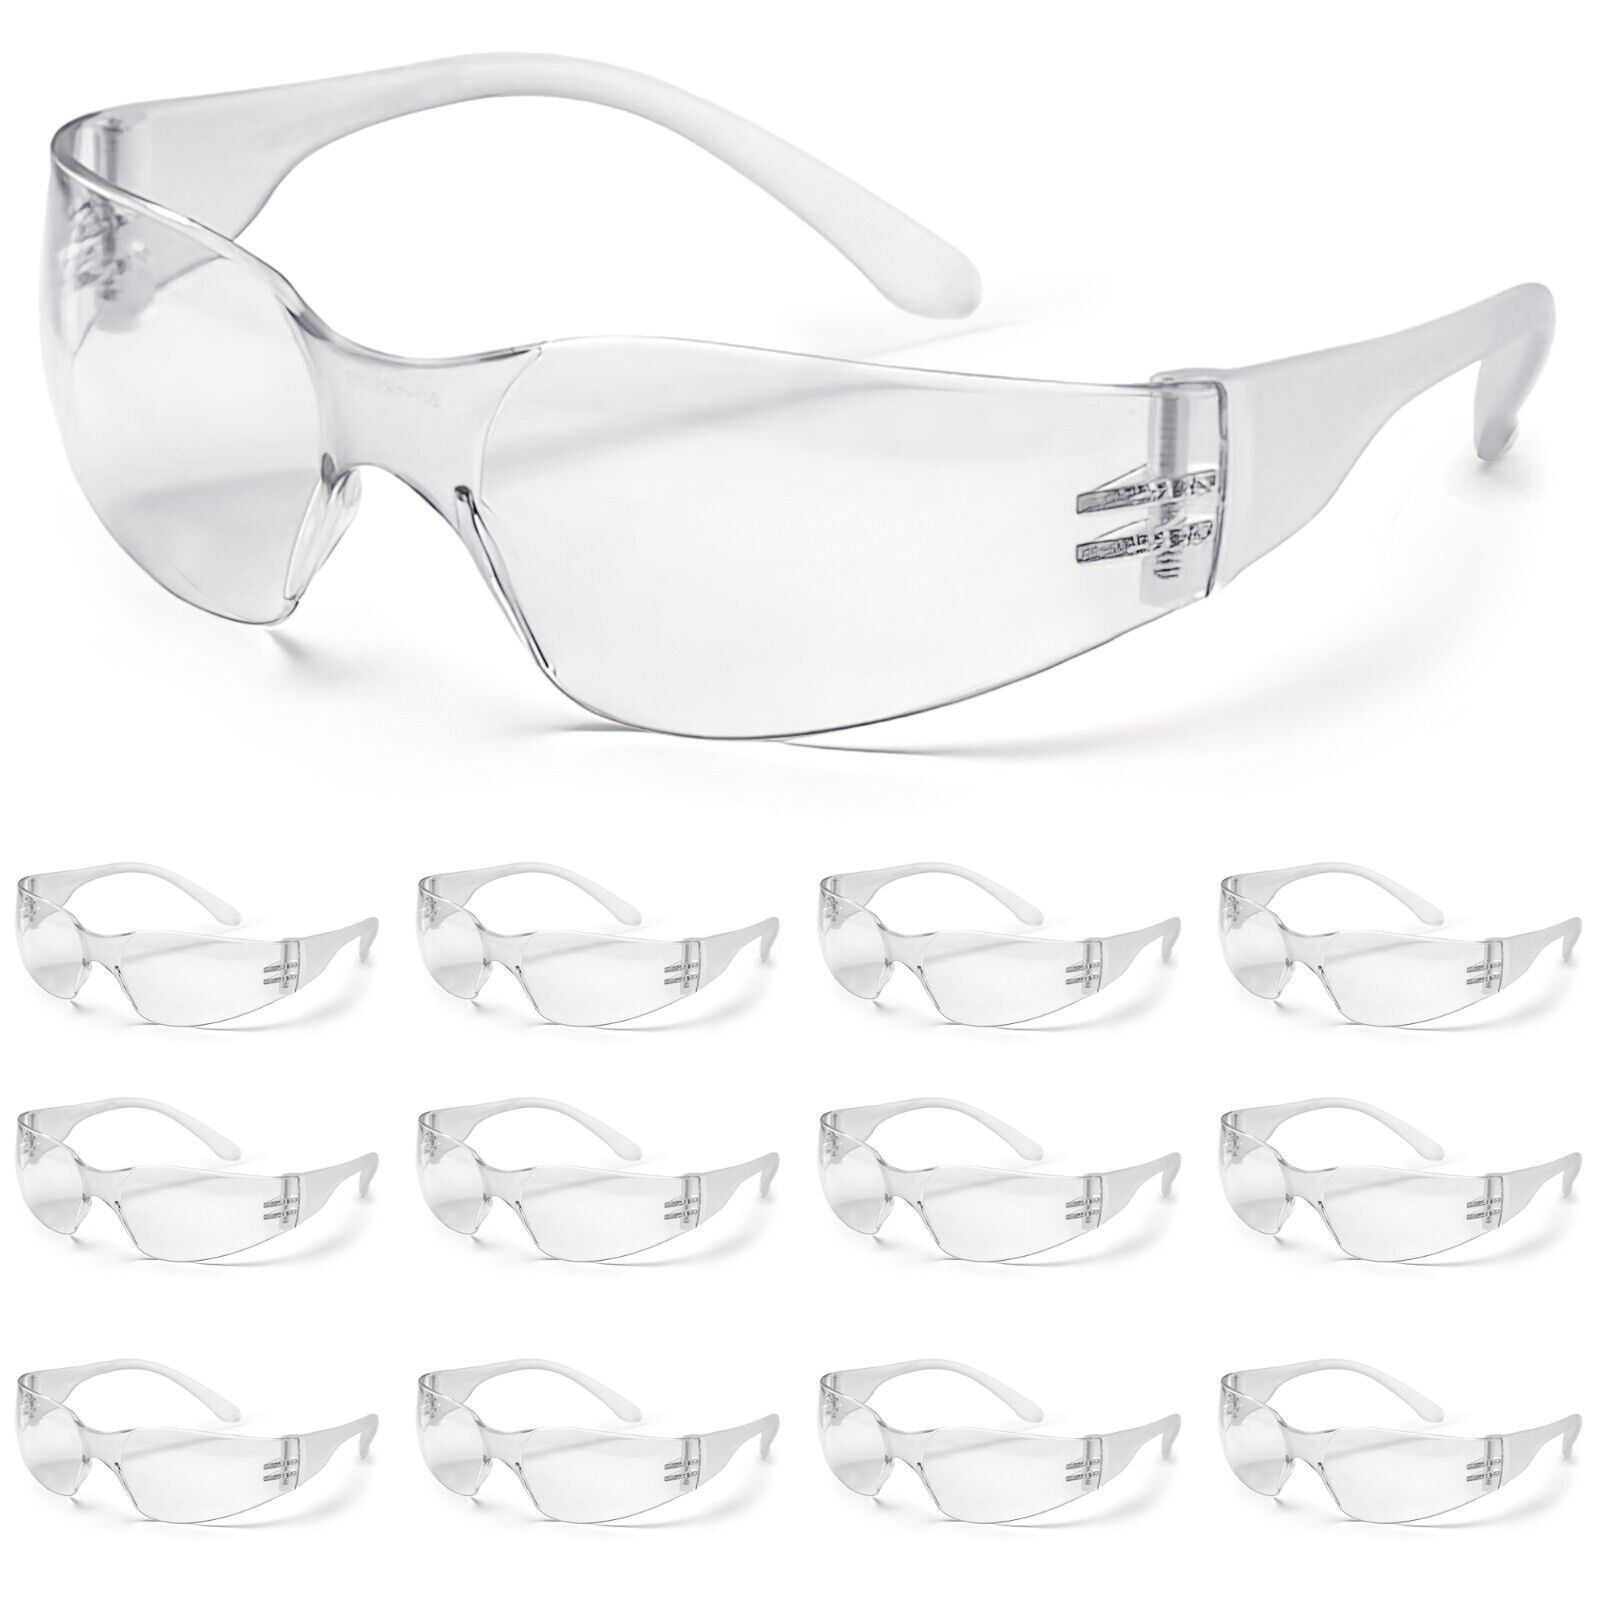 12 Pack Pair Protective Safety Glasses Clear Lens Eyewear Anti Scratch Work UV